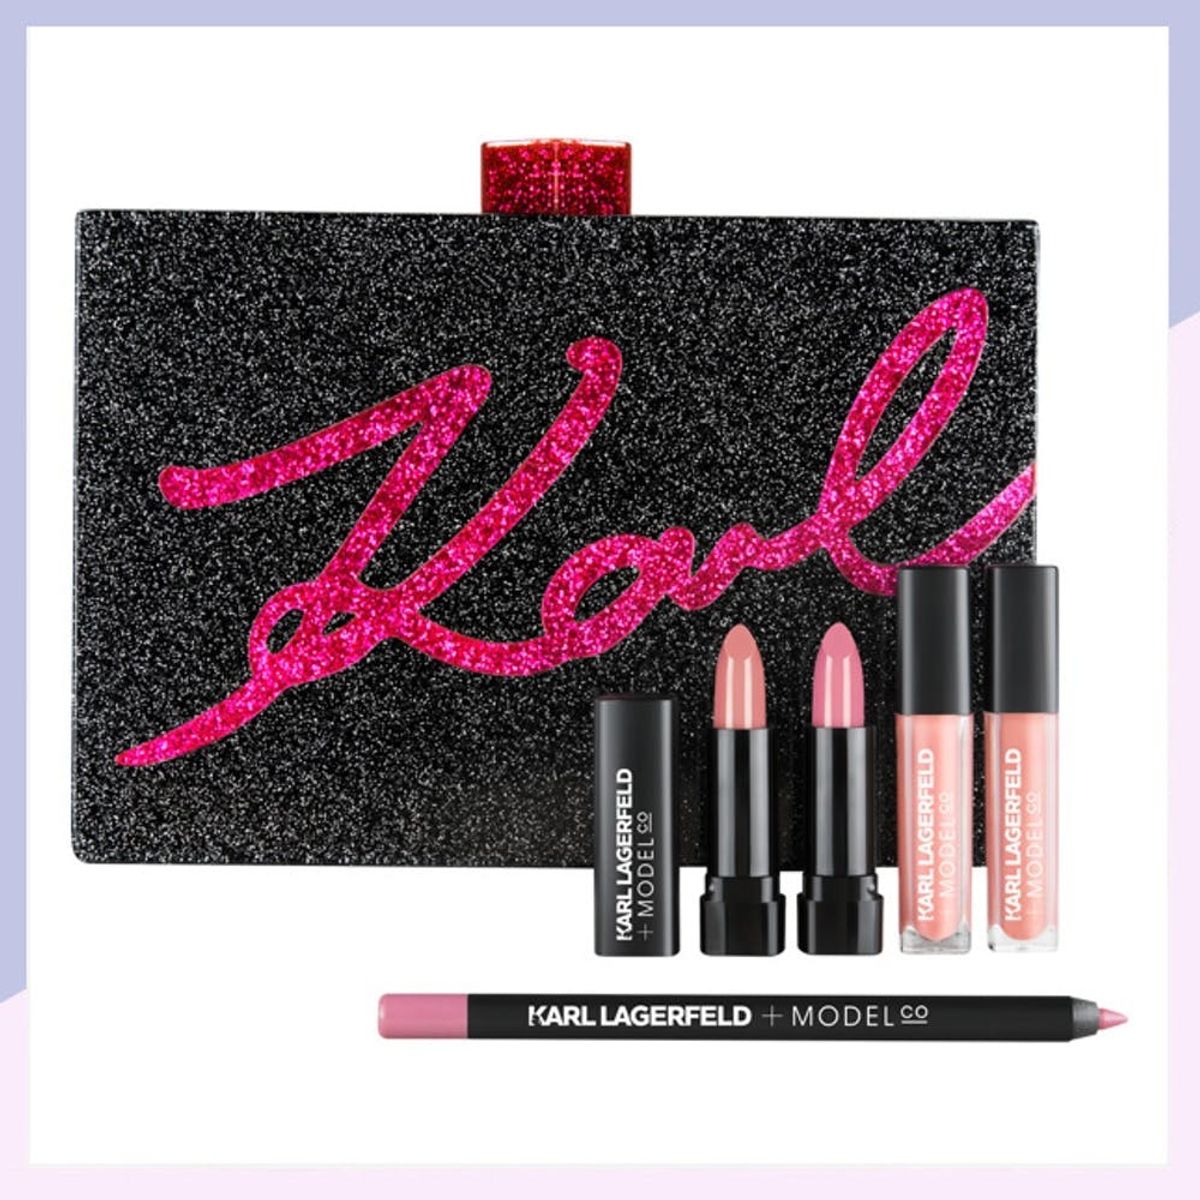 Every Must-Have Item From Karl Lagerfeld + ModelCo’s Makeup Collection